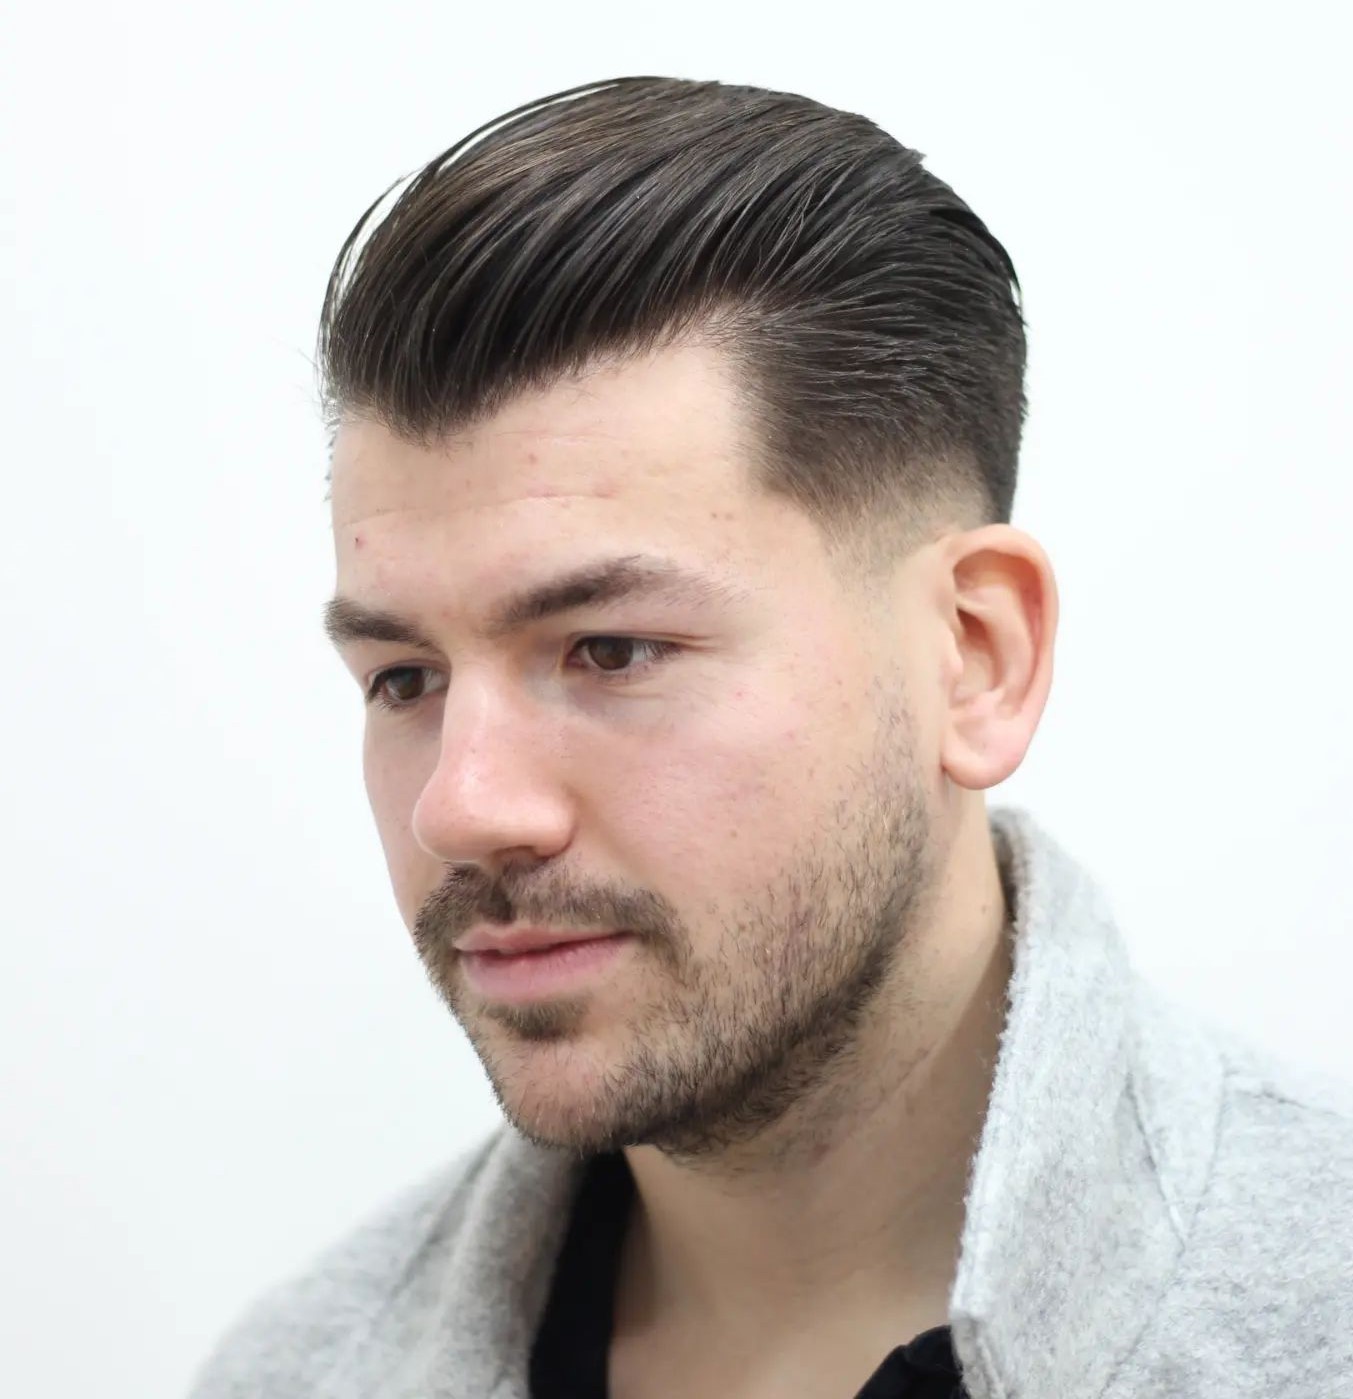 Top 10 Classic Men's Haircut Ideas That Look Trendy At Any Age - Hairstylery